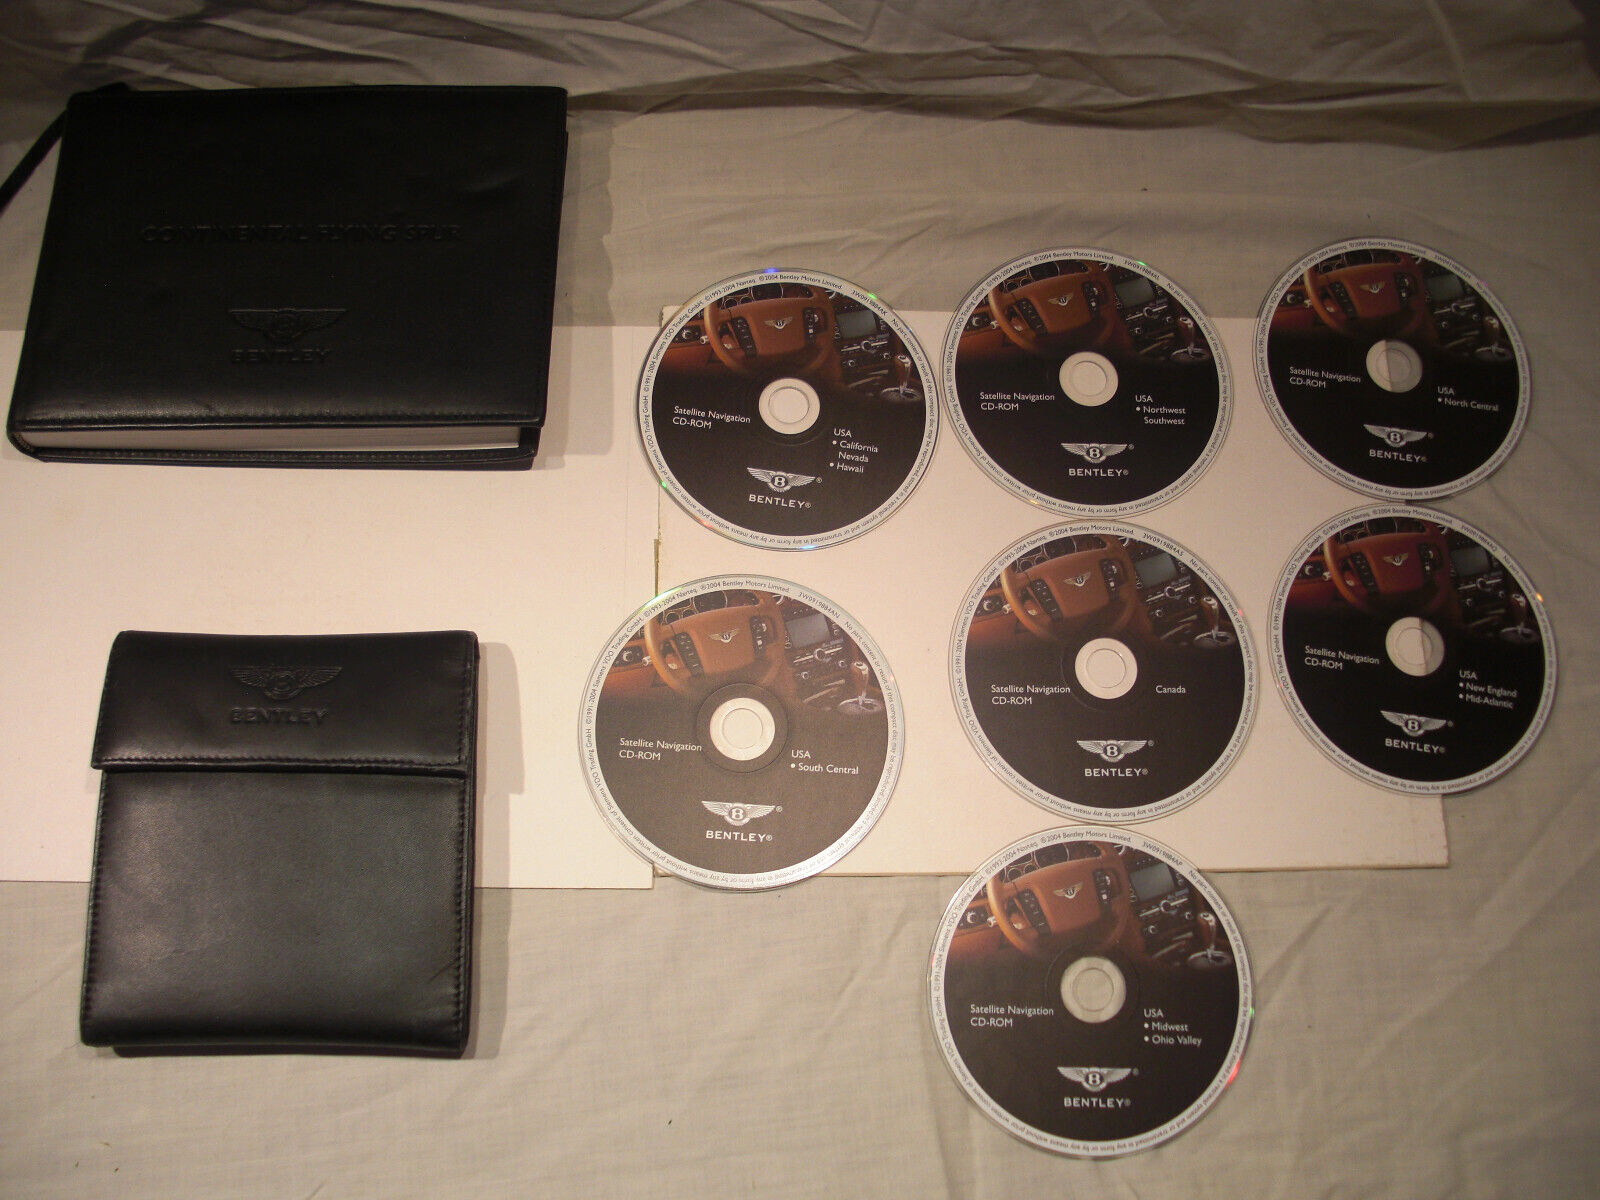 Bentley continental flying spur 2005 car manual with 7 navigation discs